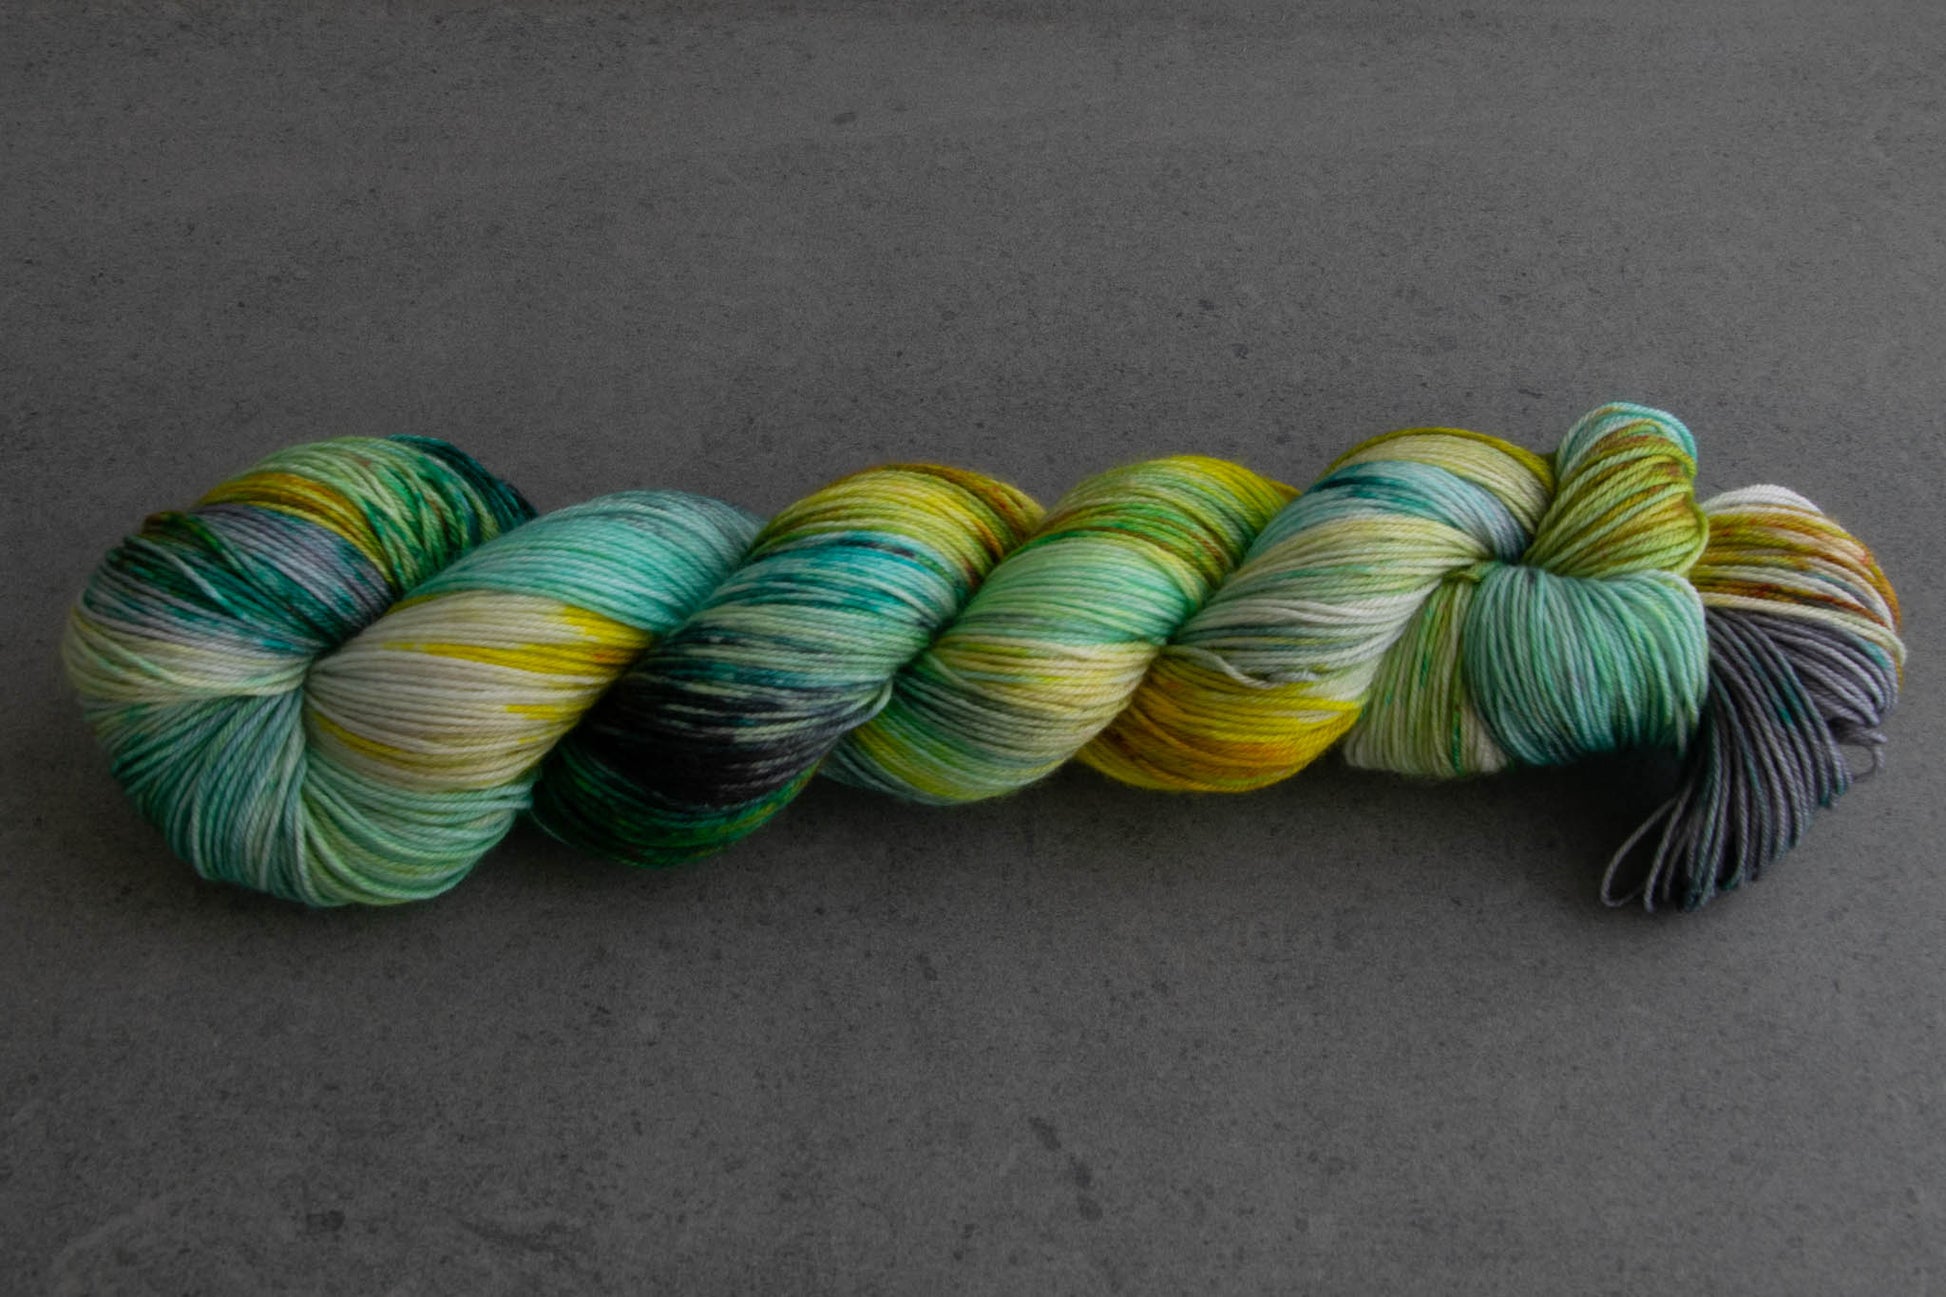 A skein of variegated aqua, yellow, green, and gray hand-dyed wool yarn.